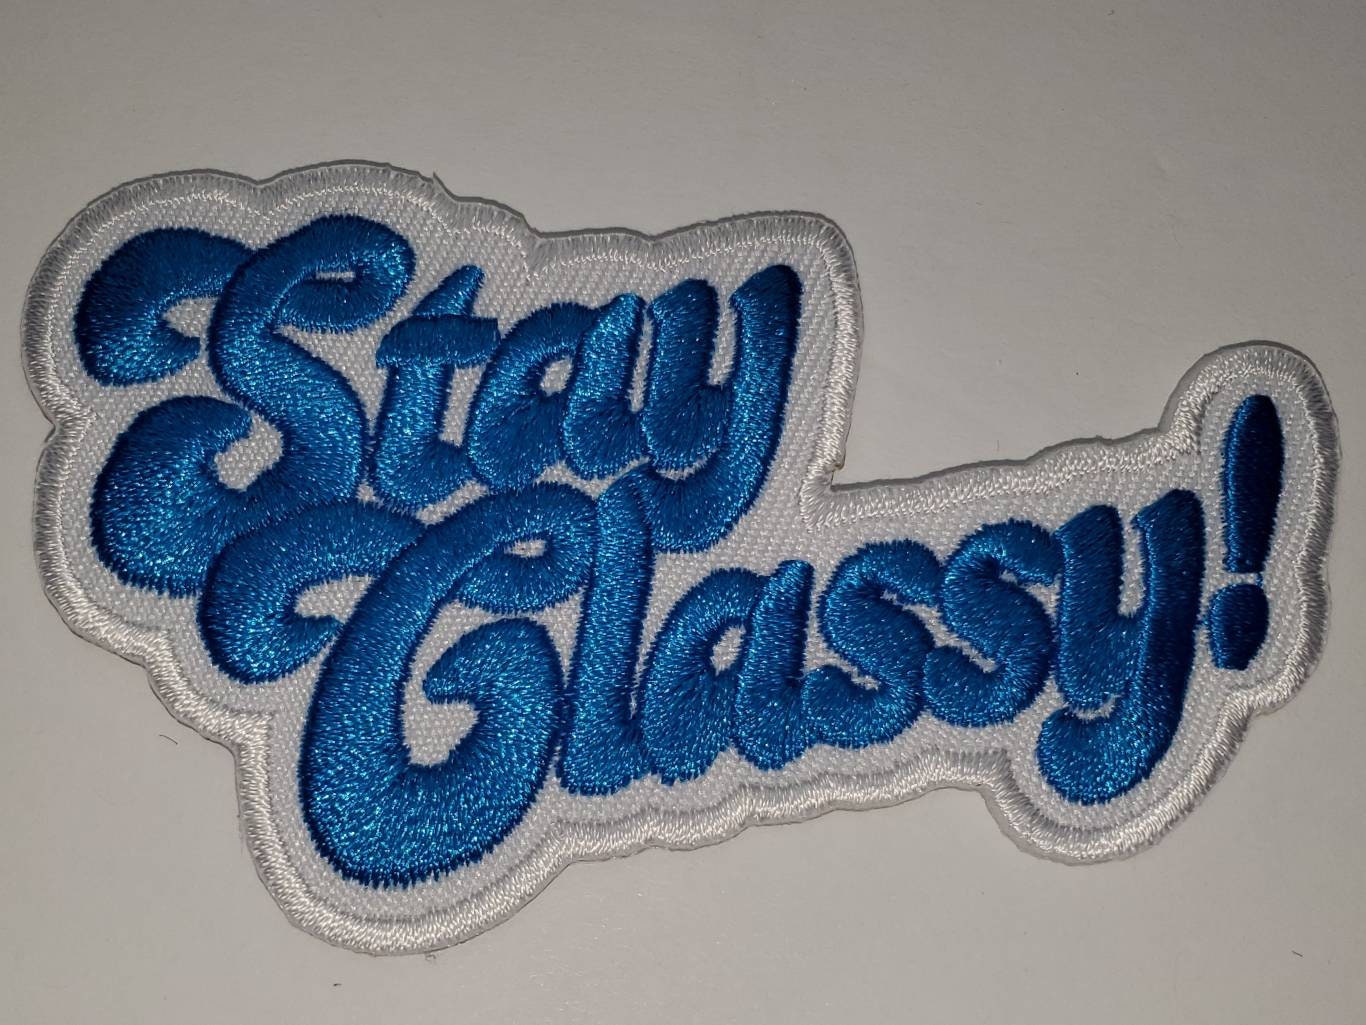 New Arrival, Blue & White Statement Patch, "Stay Classy" 3" DIY Patch, Iron-on Embroidered Patch; Blue Applique for Clothing and Accessories